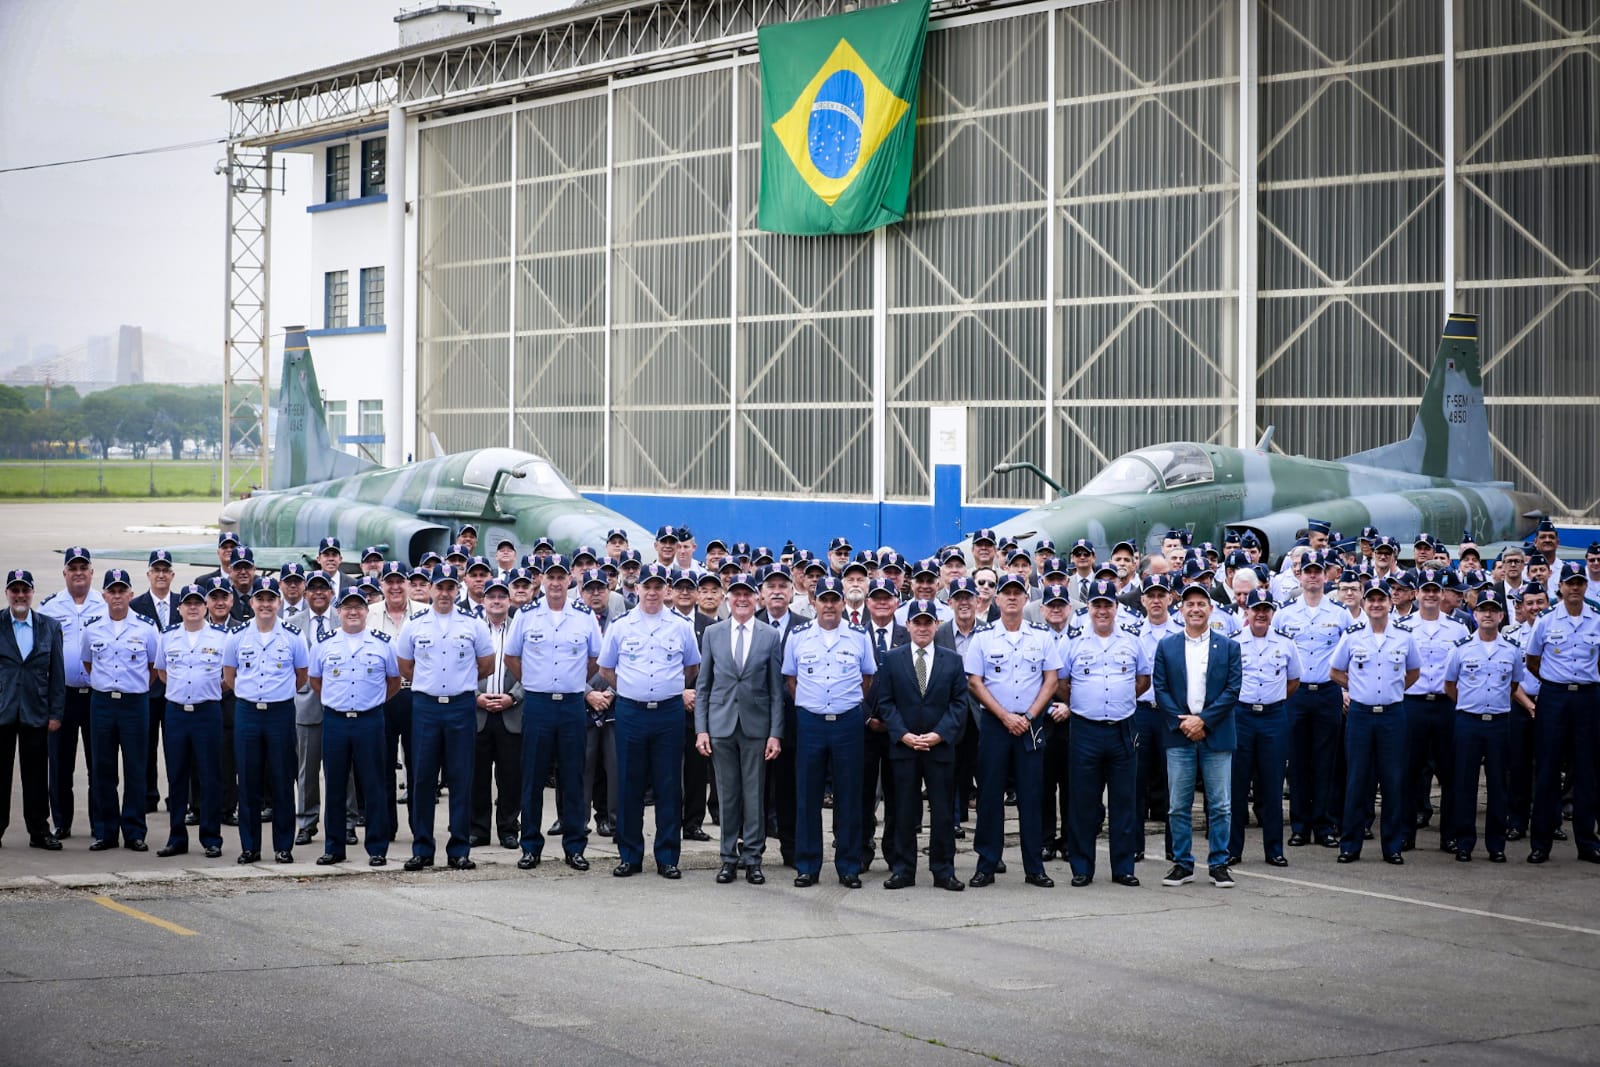 The Brazilian Air Force celebrates 82 years of contribution to the country's technology